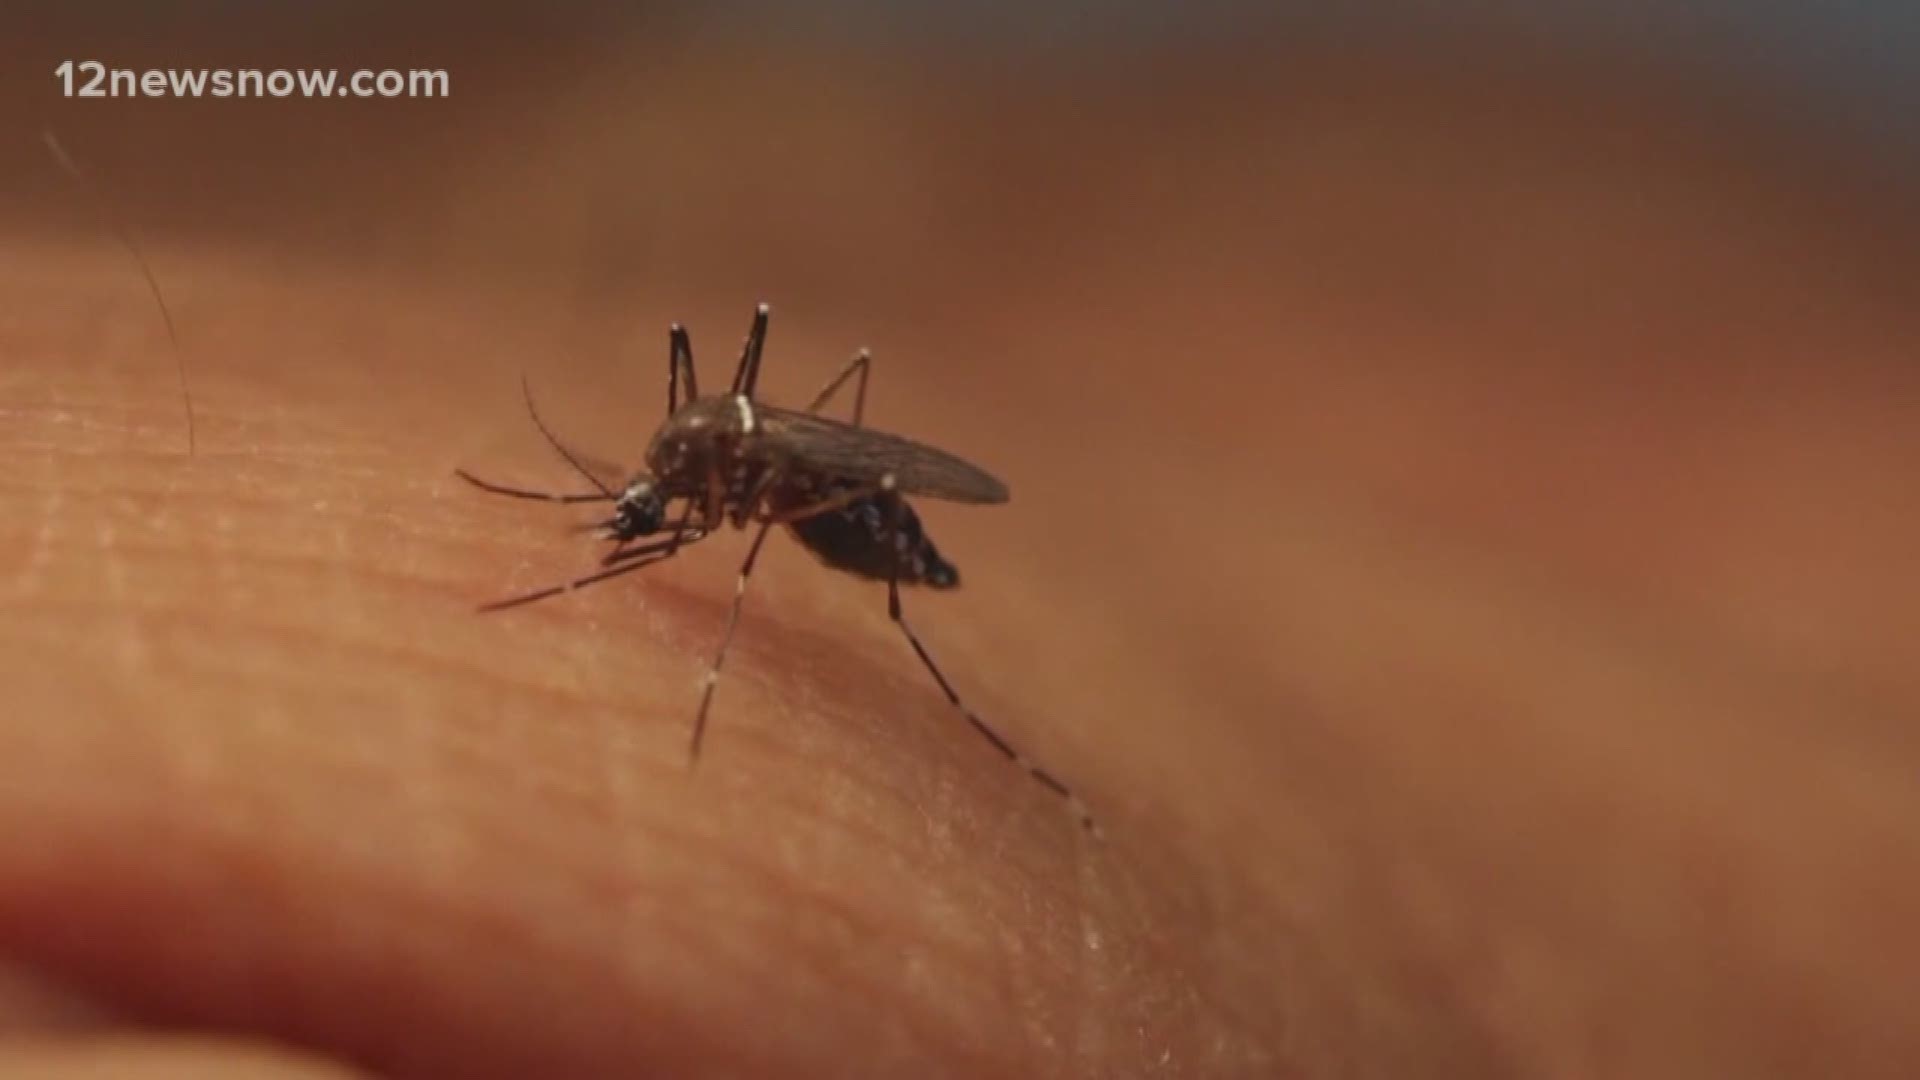 Orange and Hardin County  are working together to fight diseases mosquitoes carry.